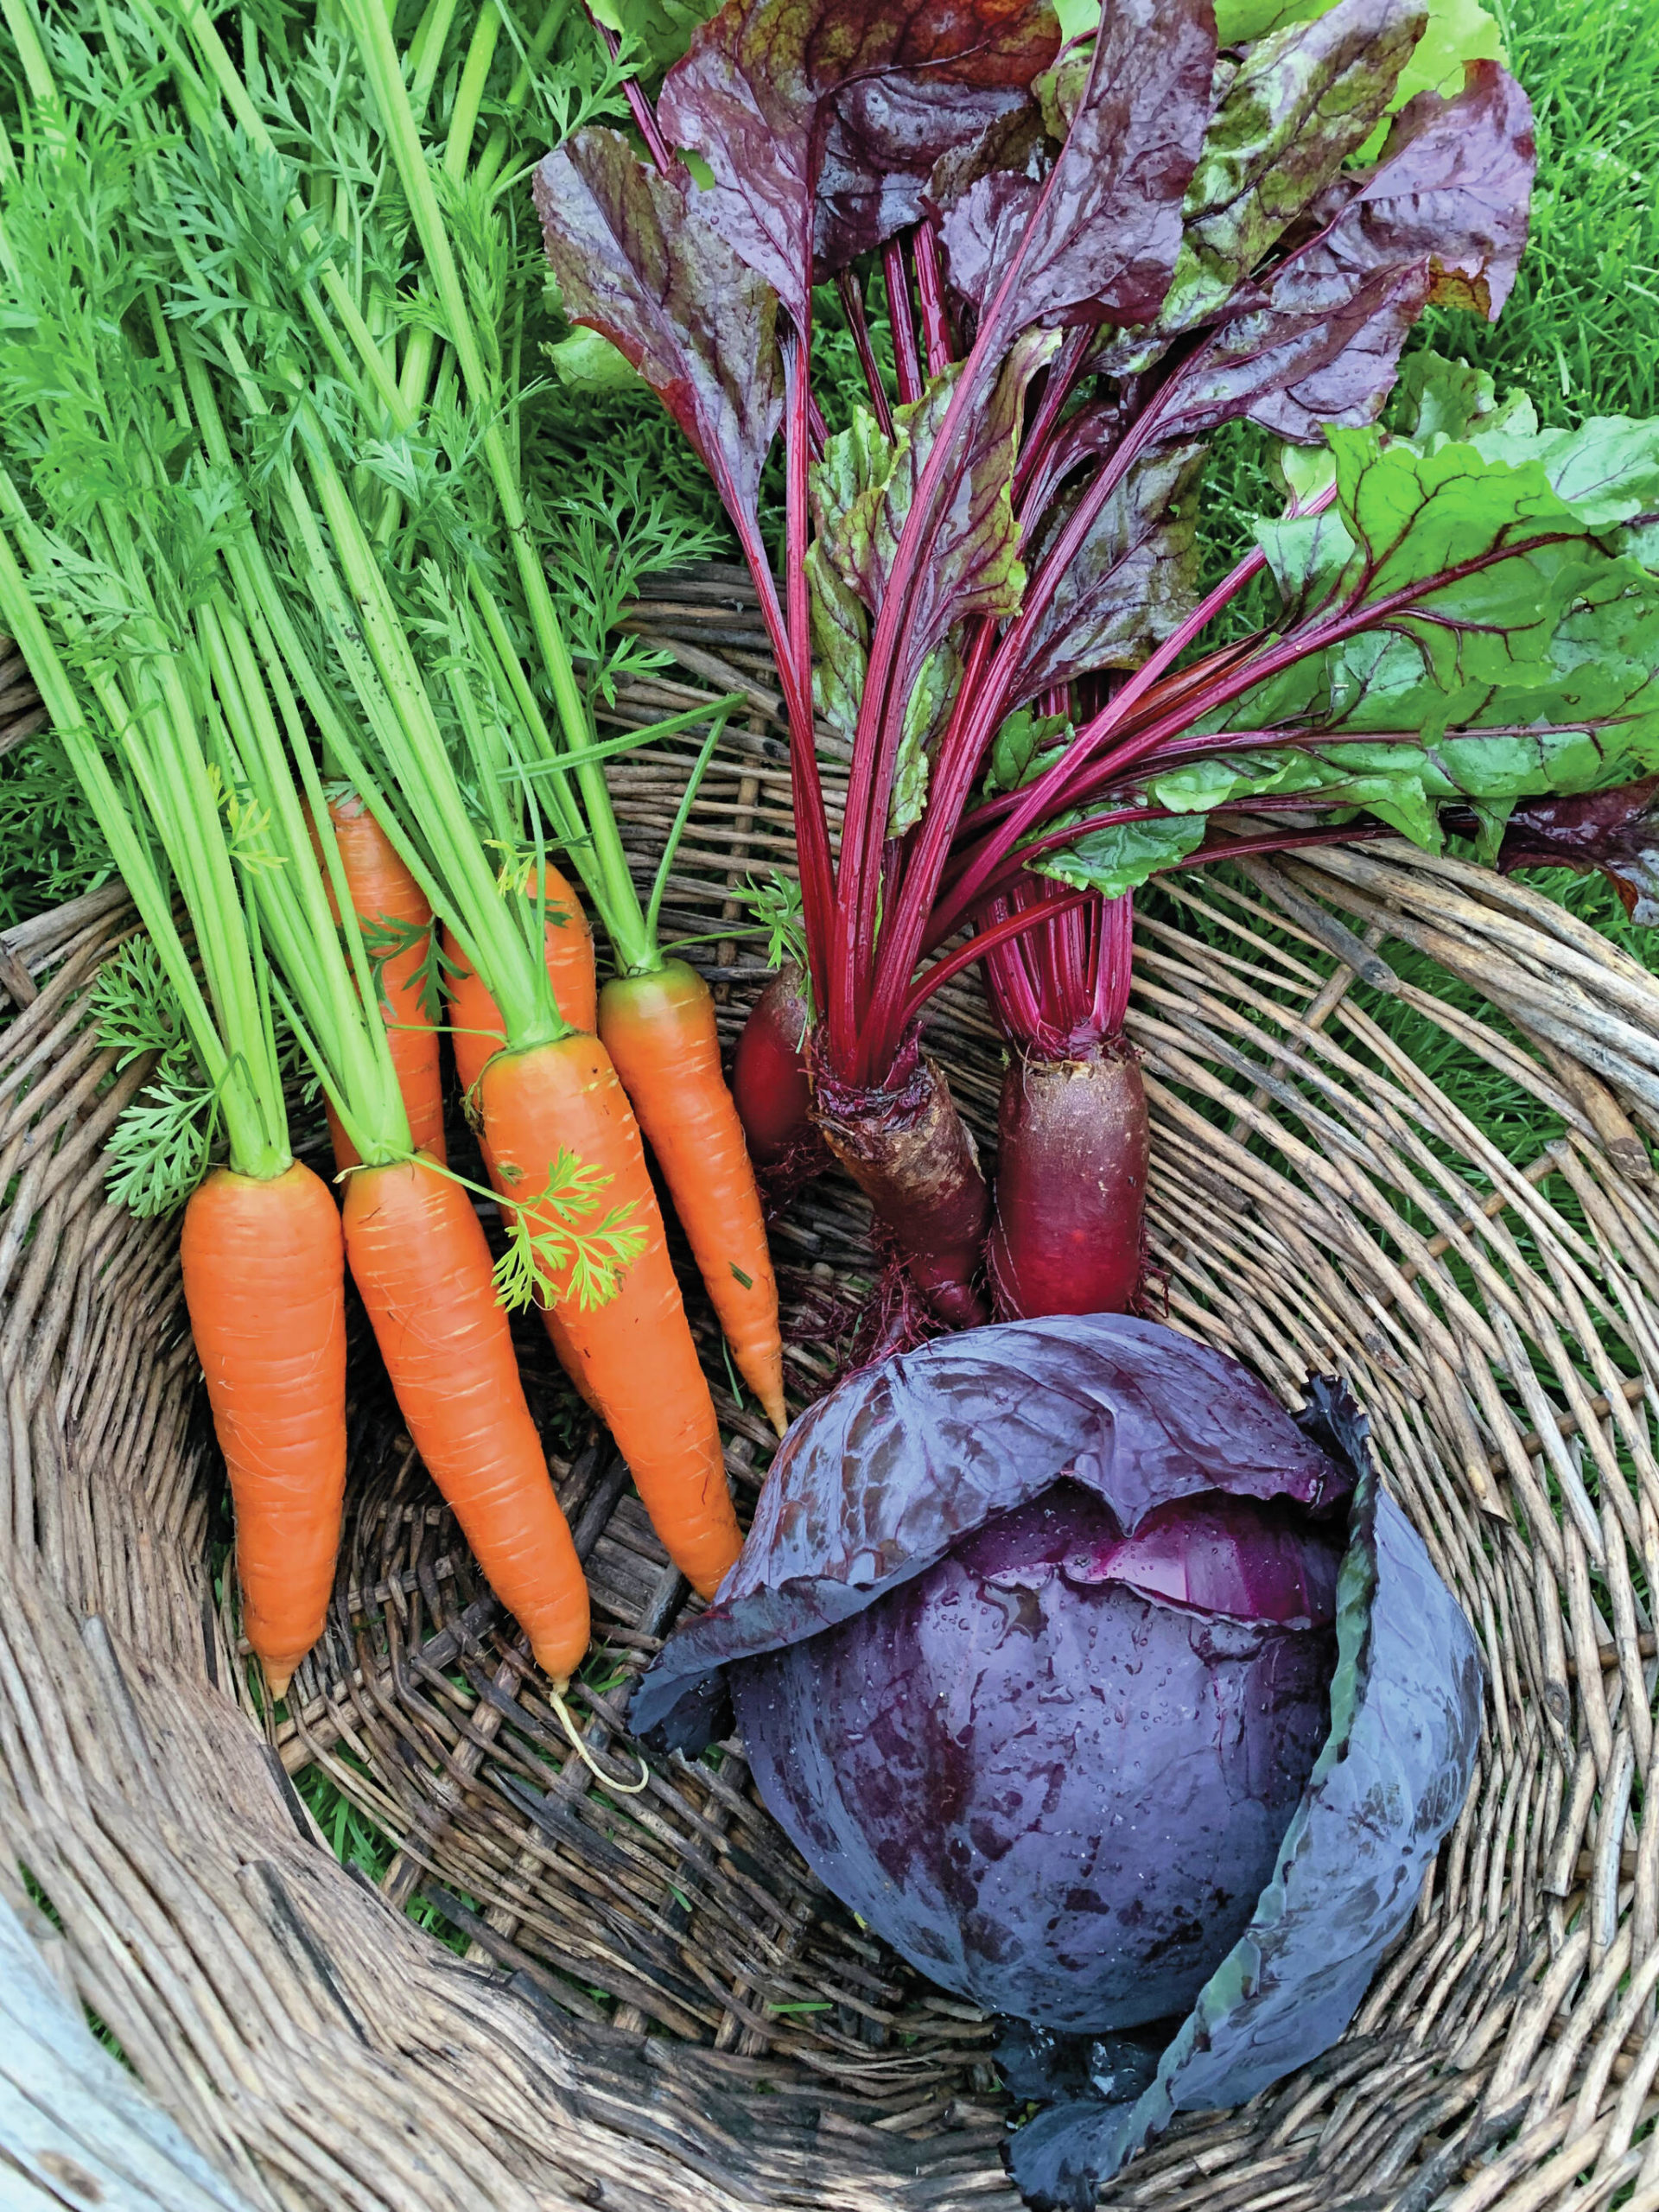 Photos by Rosemary Fitzpatrick 
Carrots, beets, red cabbage are on their way to the kitchen.